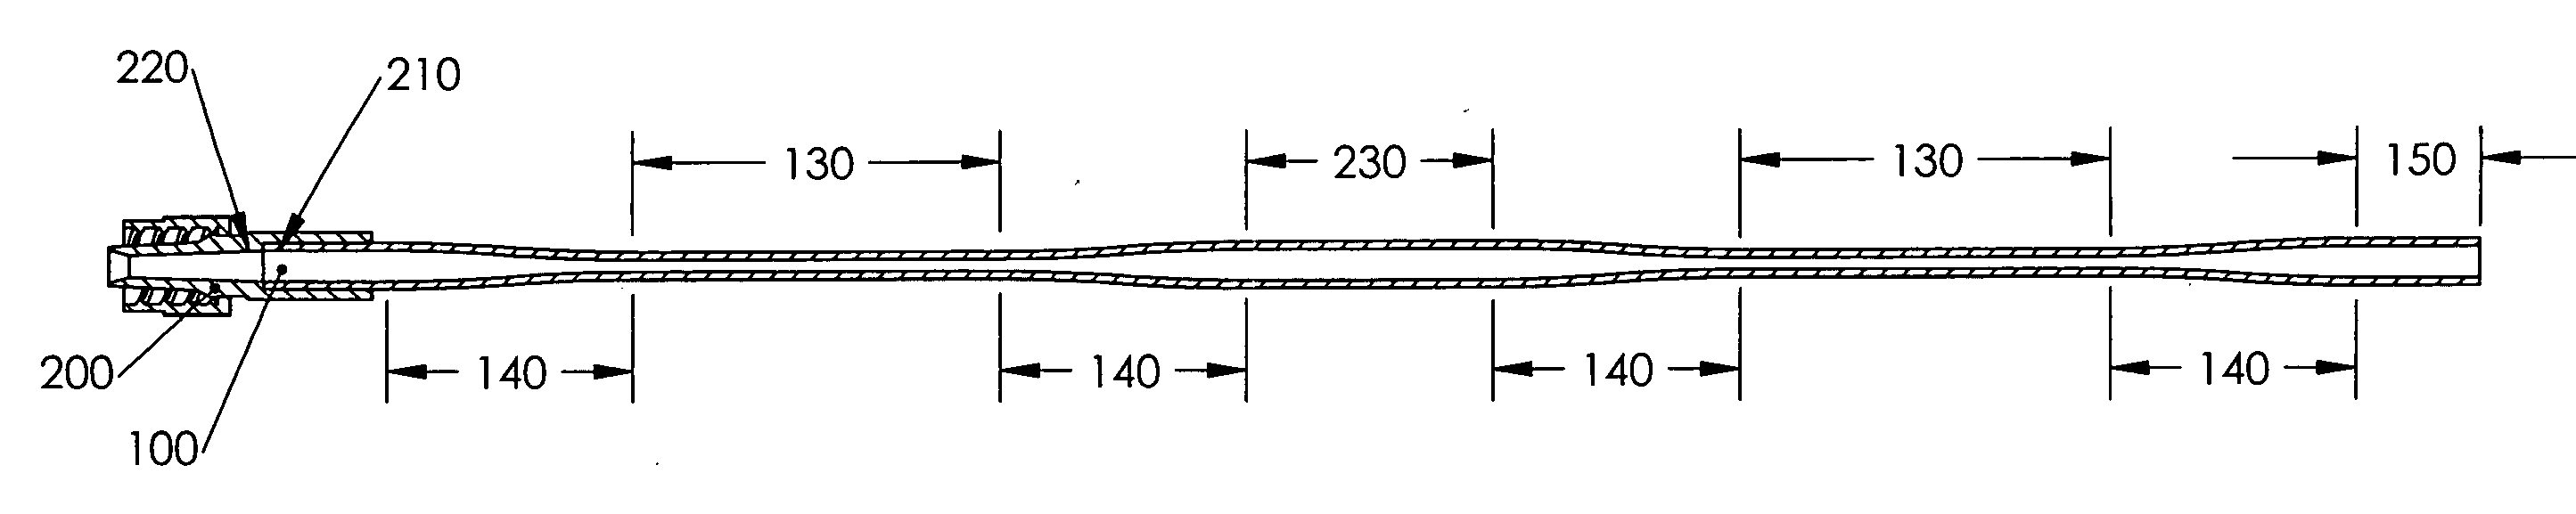 Tapered tubing for use in extracorporeal circuit for peripheral vein fluid removal